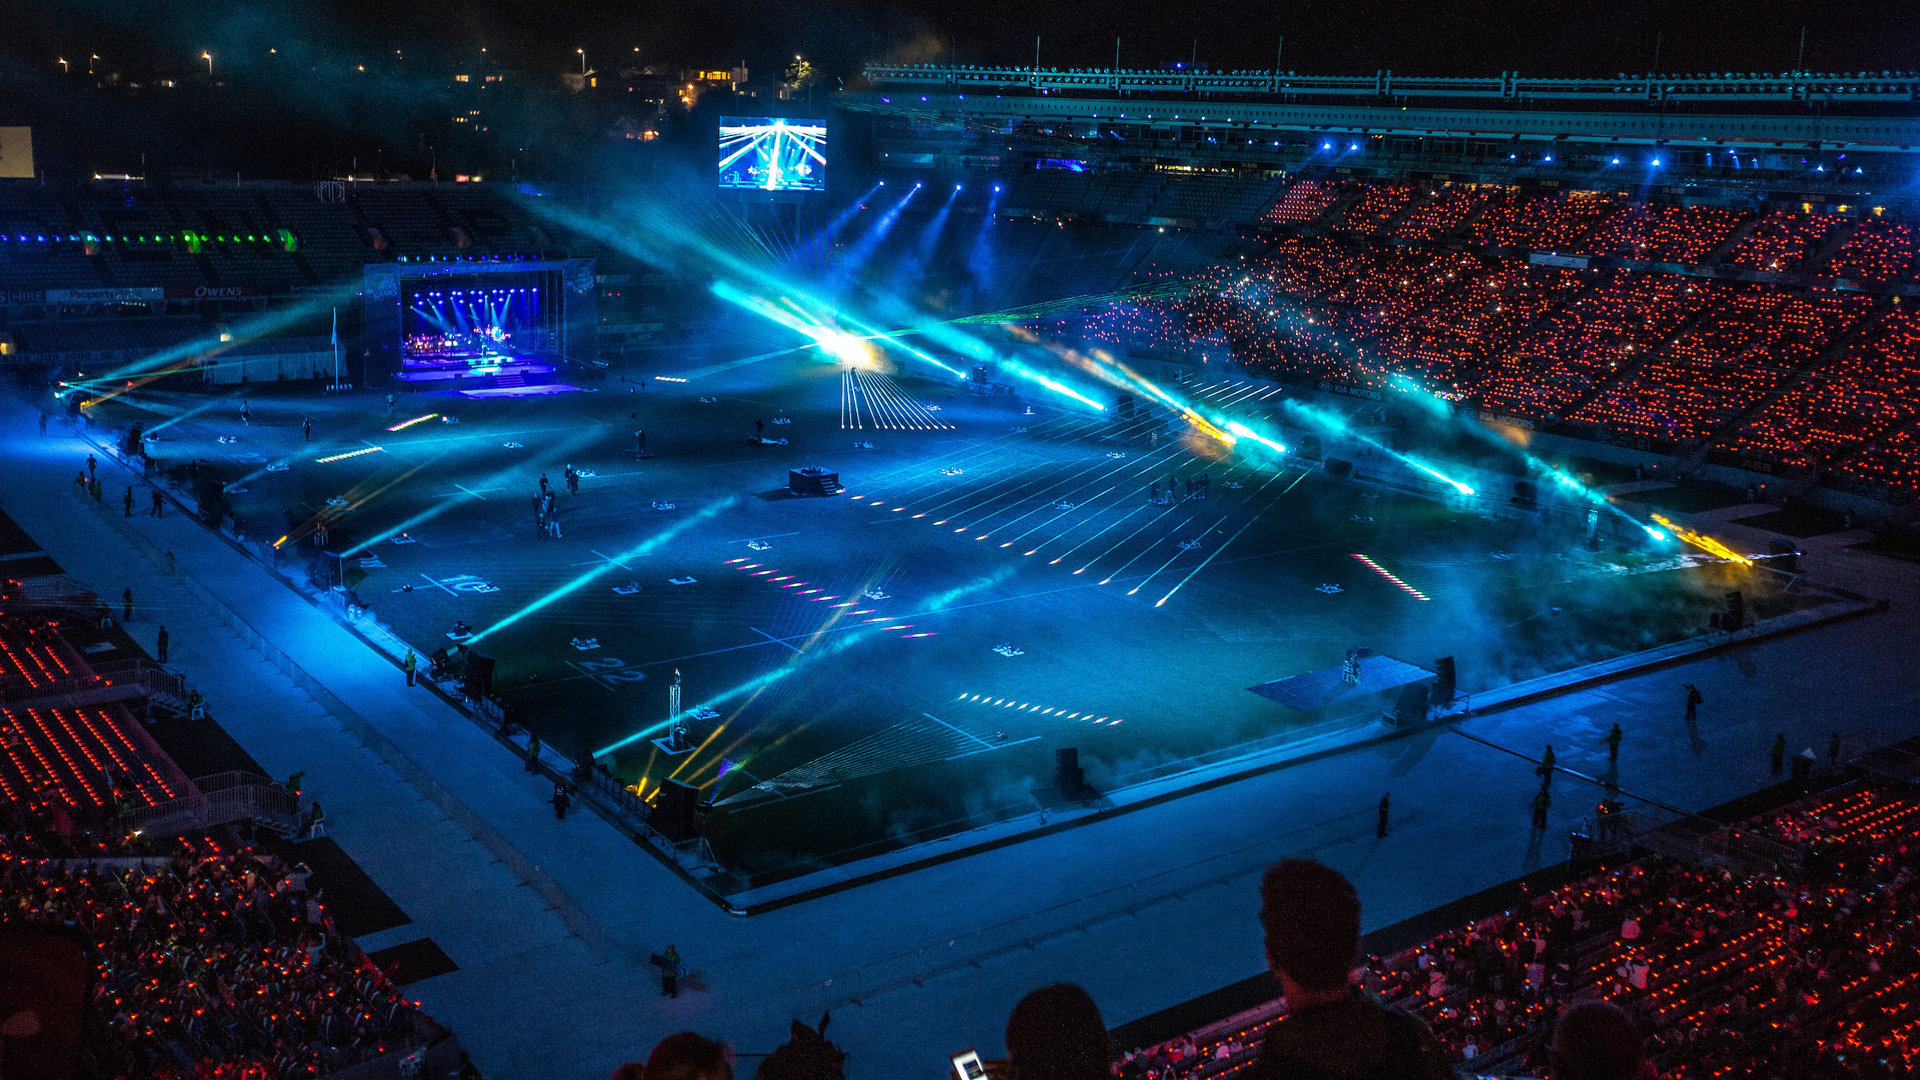 World Masters Games. Opening ceremony at Eden Park. Auckland. 21 April 2017. Photo:Gareth Cooke/Subzero Images